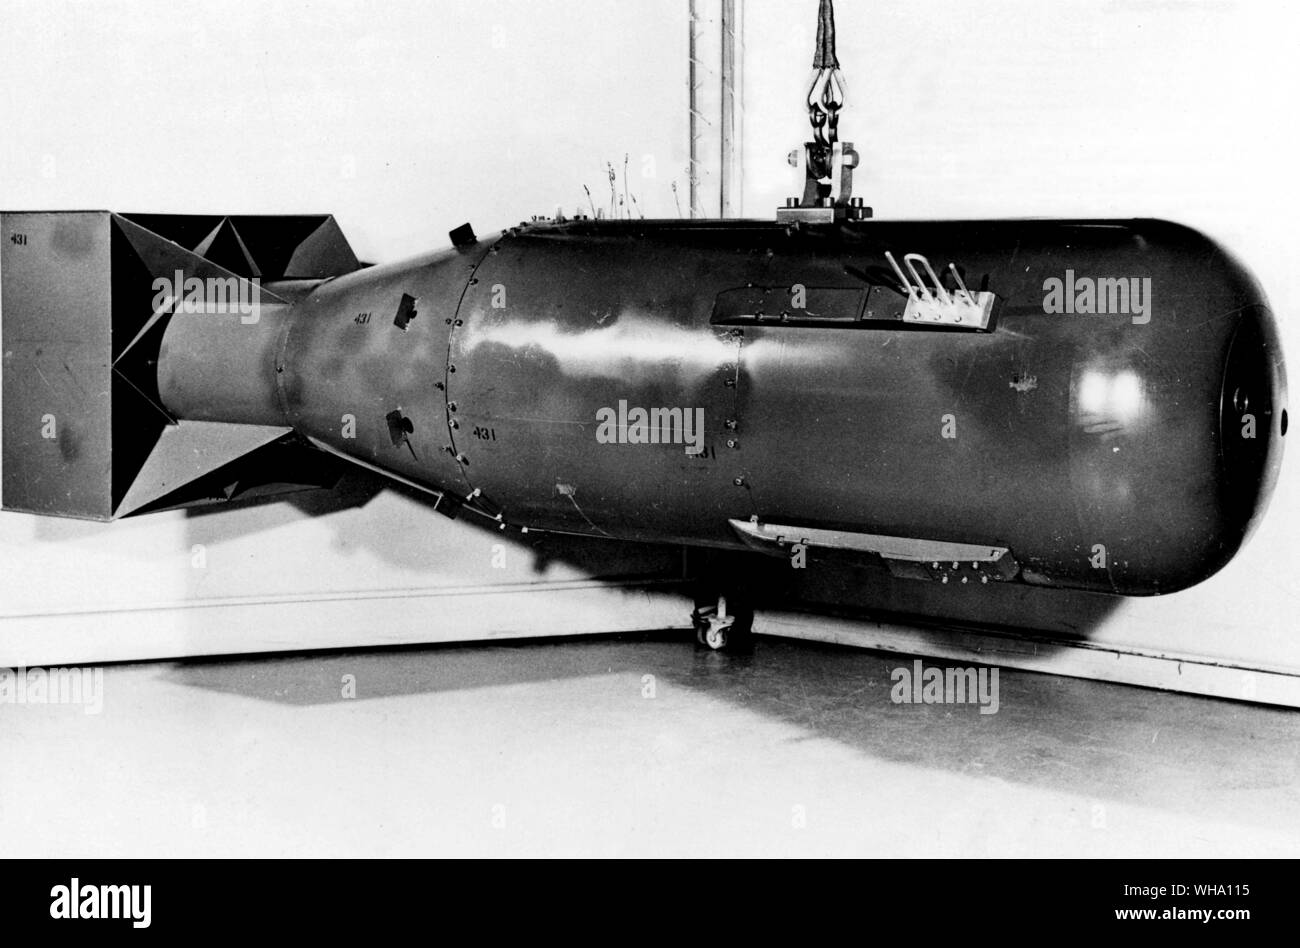 WW2: Nuclear weapon of the Little Boy type, the kind that was detonated over Hiroshima, Japan in 1945. It weighed just over 9,000 pounds and has a yield over c.20,000 tons of high explosive. Stock Photo